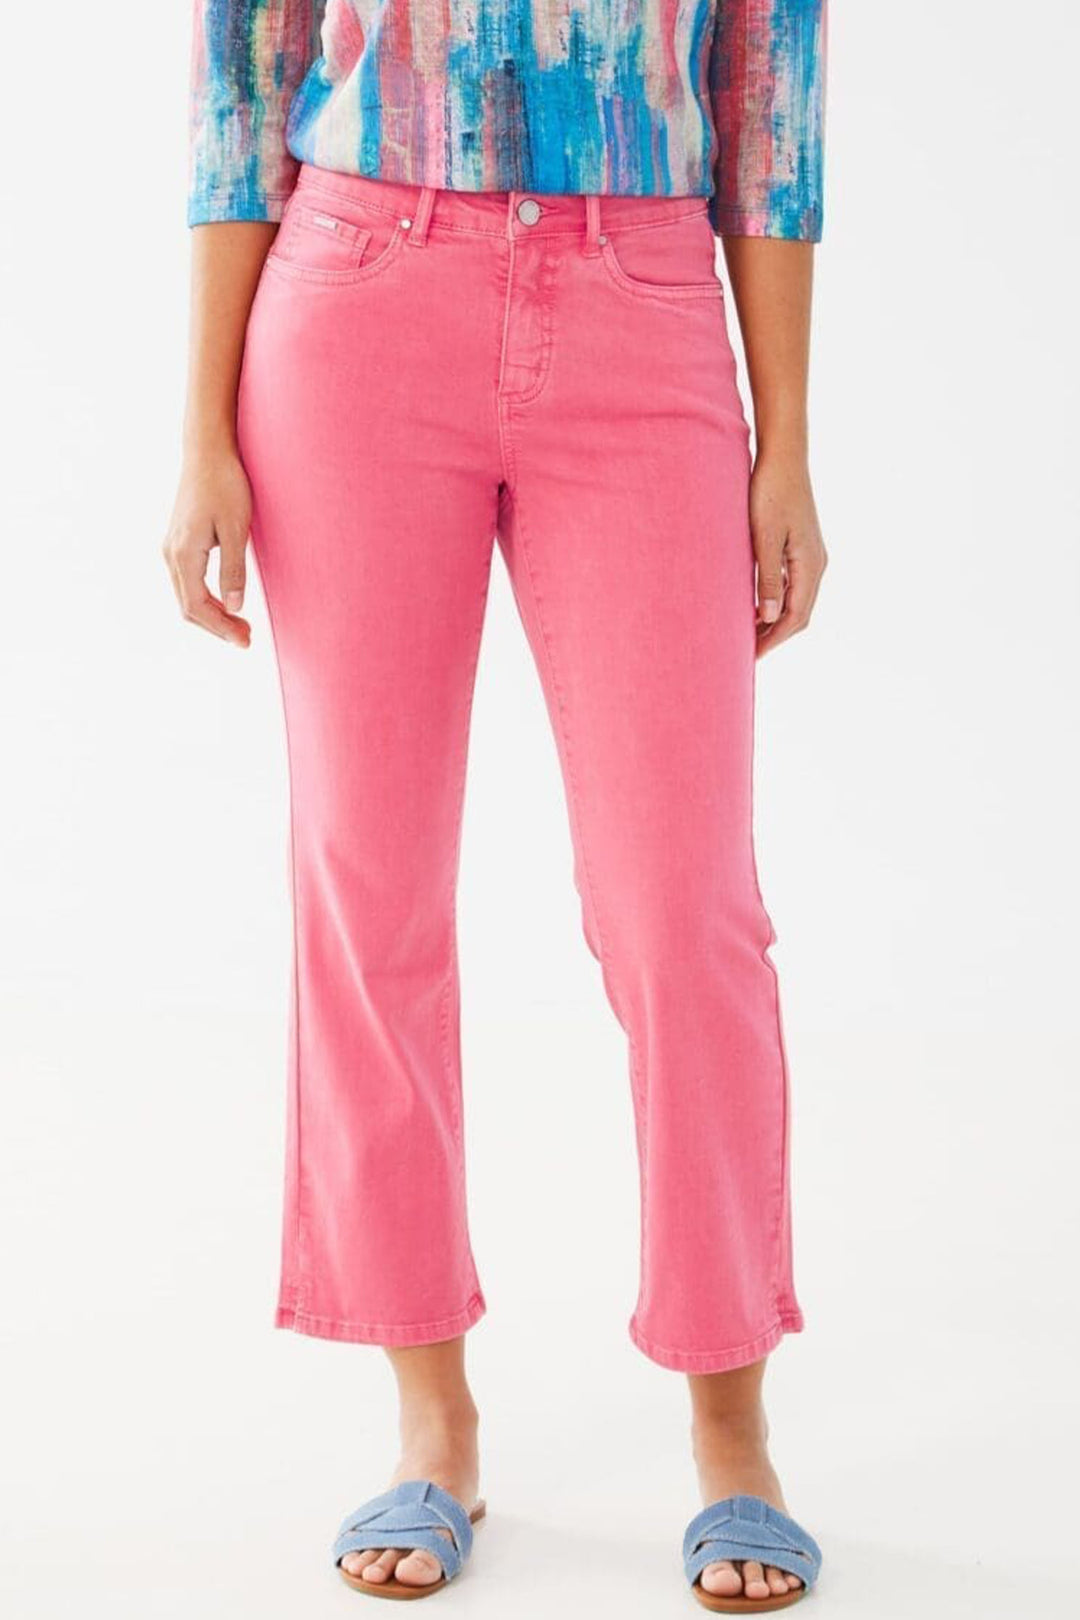 Buy Washed Capri Jeggings with Scoop Pockets Online at Best Prices